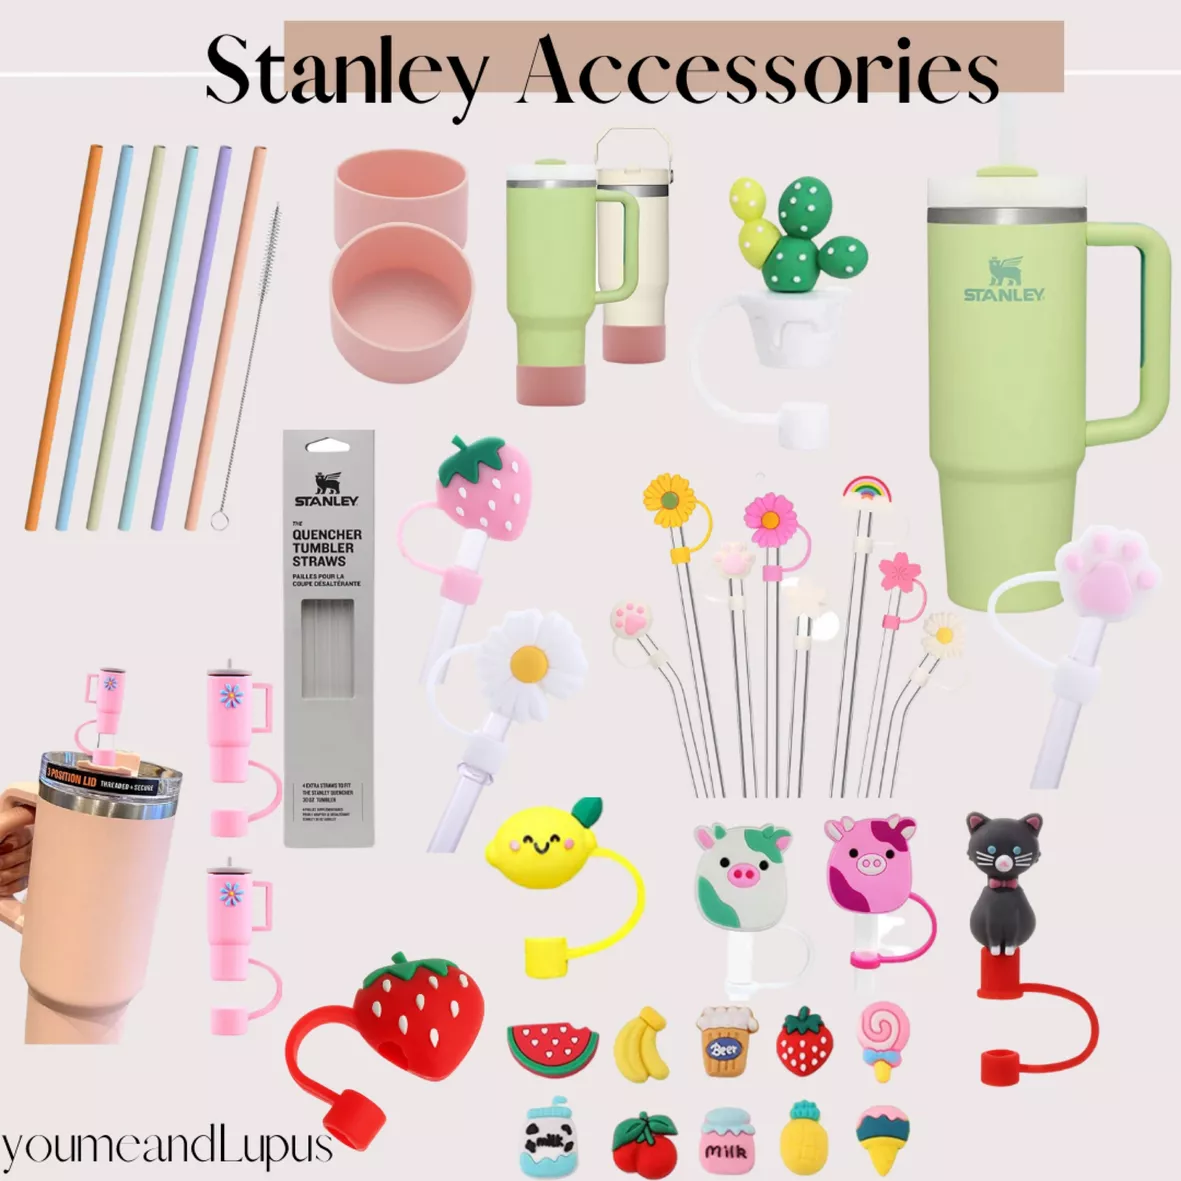 10pcs Straw Cover Cap for Stanley Cup, Silicone Straw Topper Compatible with Stanley 30&40 oz Tumbler with Handle,Straw Tip Covers for Stanley Cups